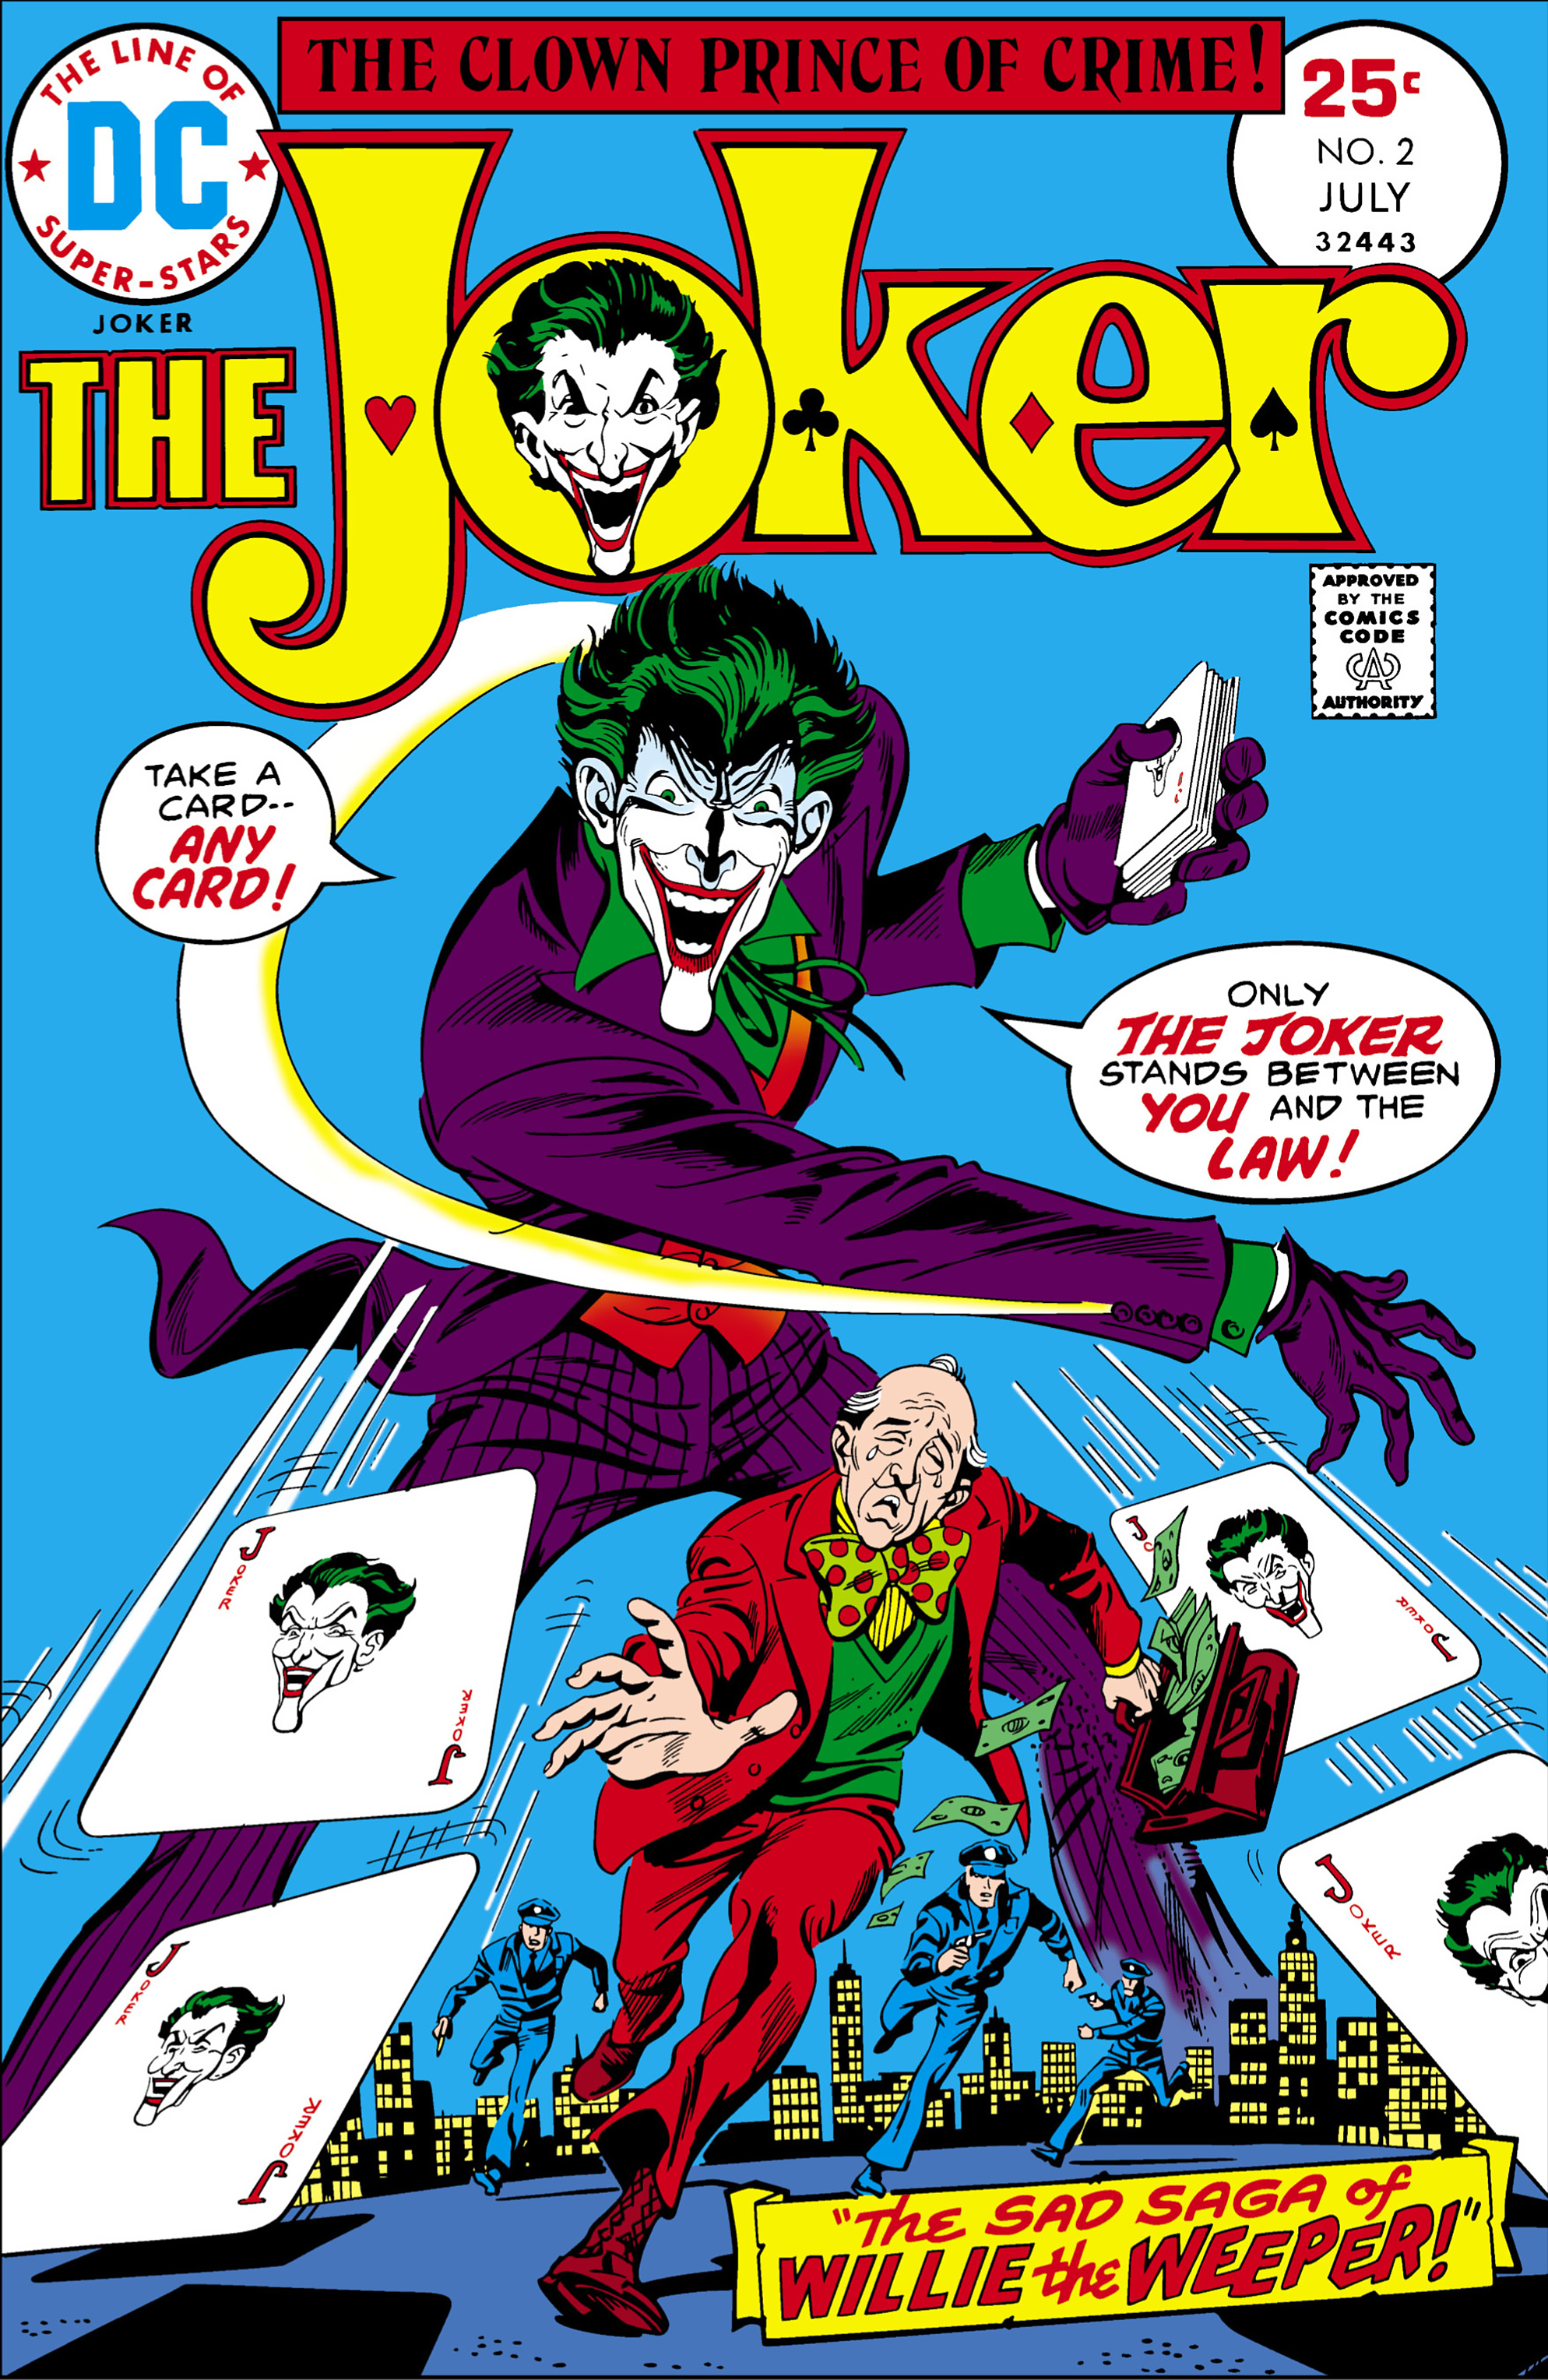 The Joker (1975-1976 + 2019): Chapter 2 - Page 1